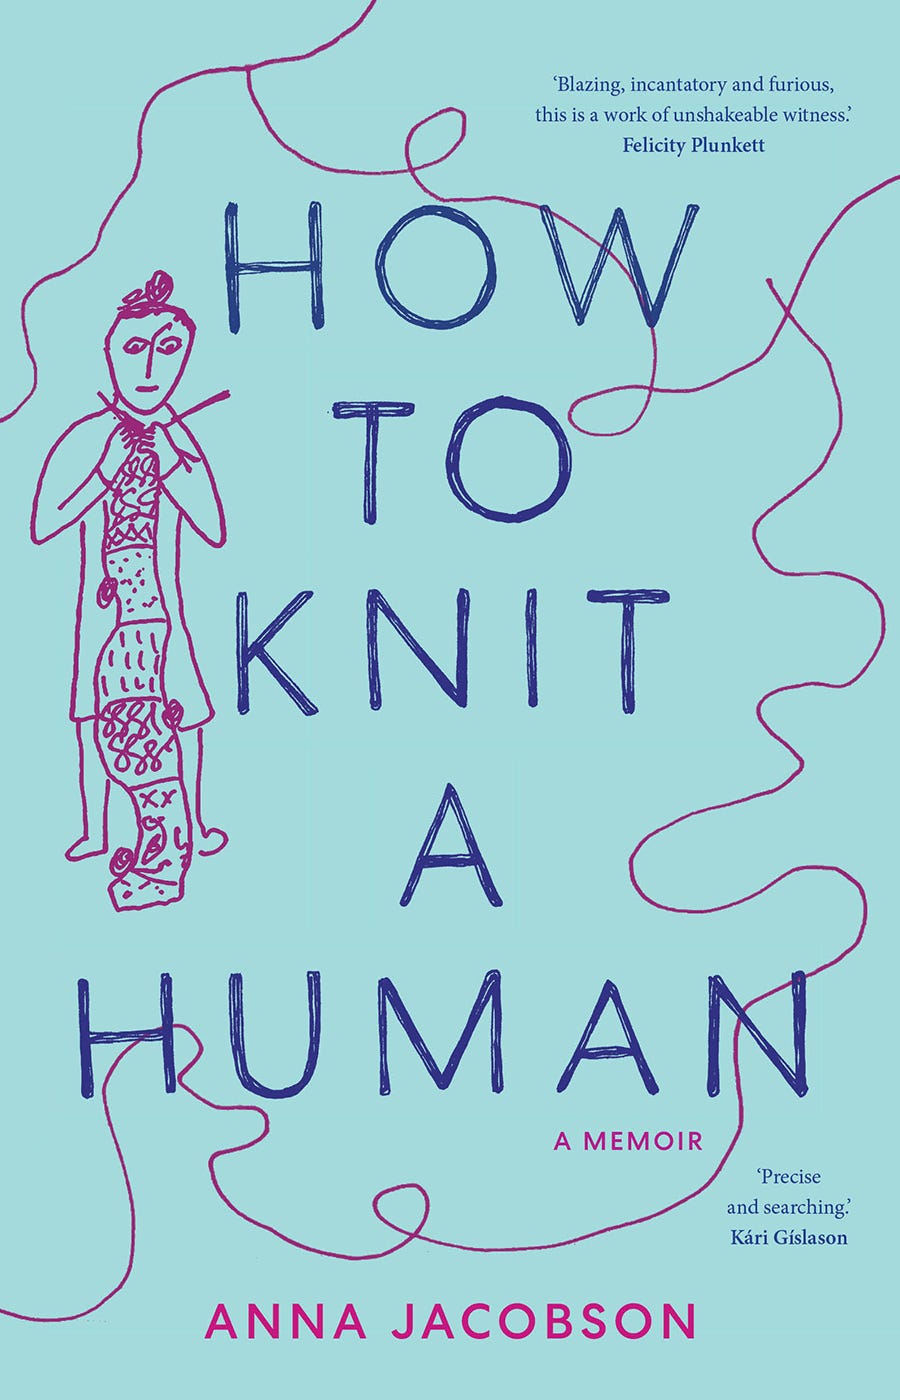 Image description: Light blue book cover with dark blue text that reads ‘How to Knit a Human’ and pink text that reads ‘A Memoir. Anna Jacobson.’ Surrounding these words are endorsement quotes and the pink sketch of a person knitting a long scarf, with wool strands trailing around the whole image.